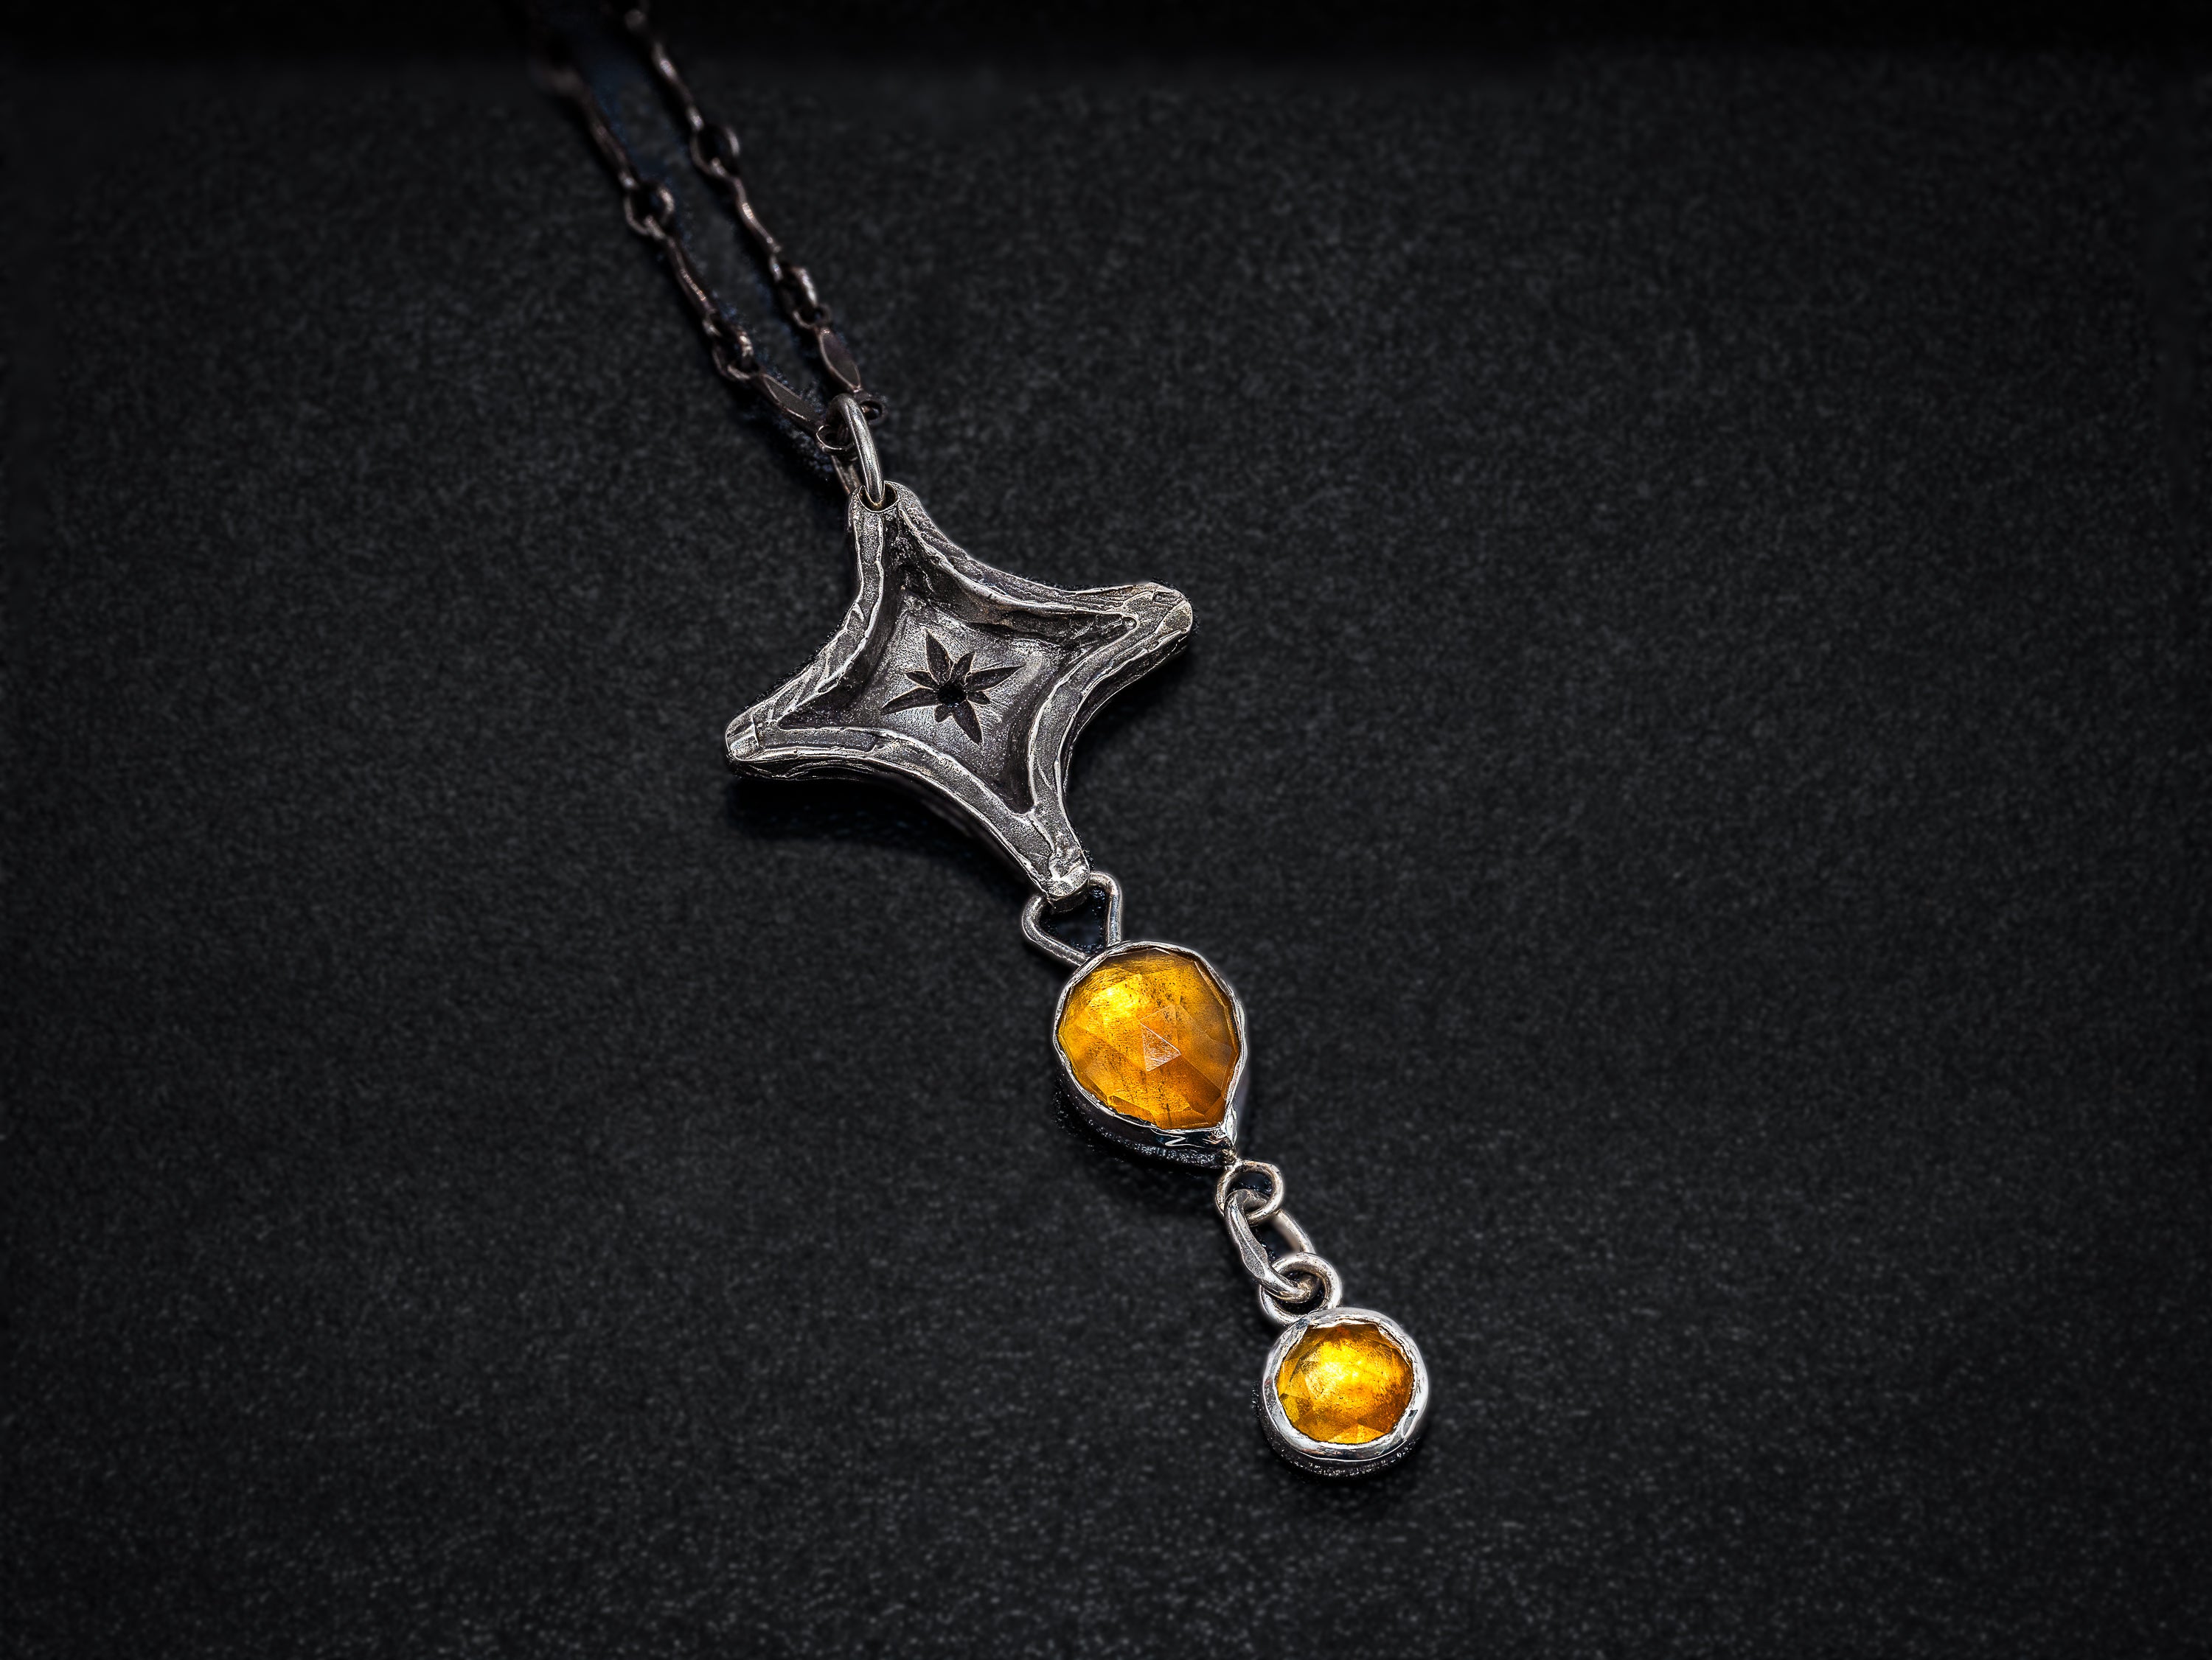 Realtas Gold Tears Necklace-Sterling Silver and Citrine